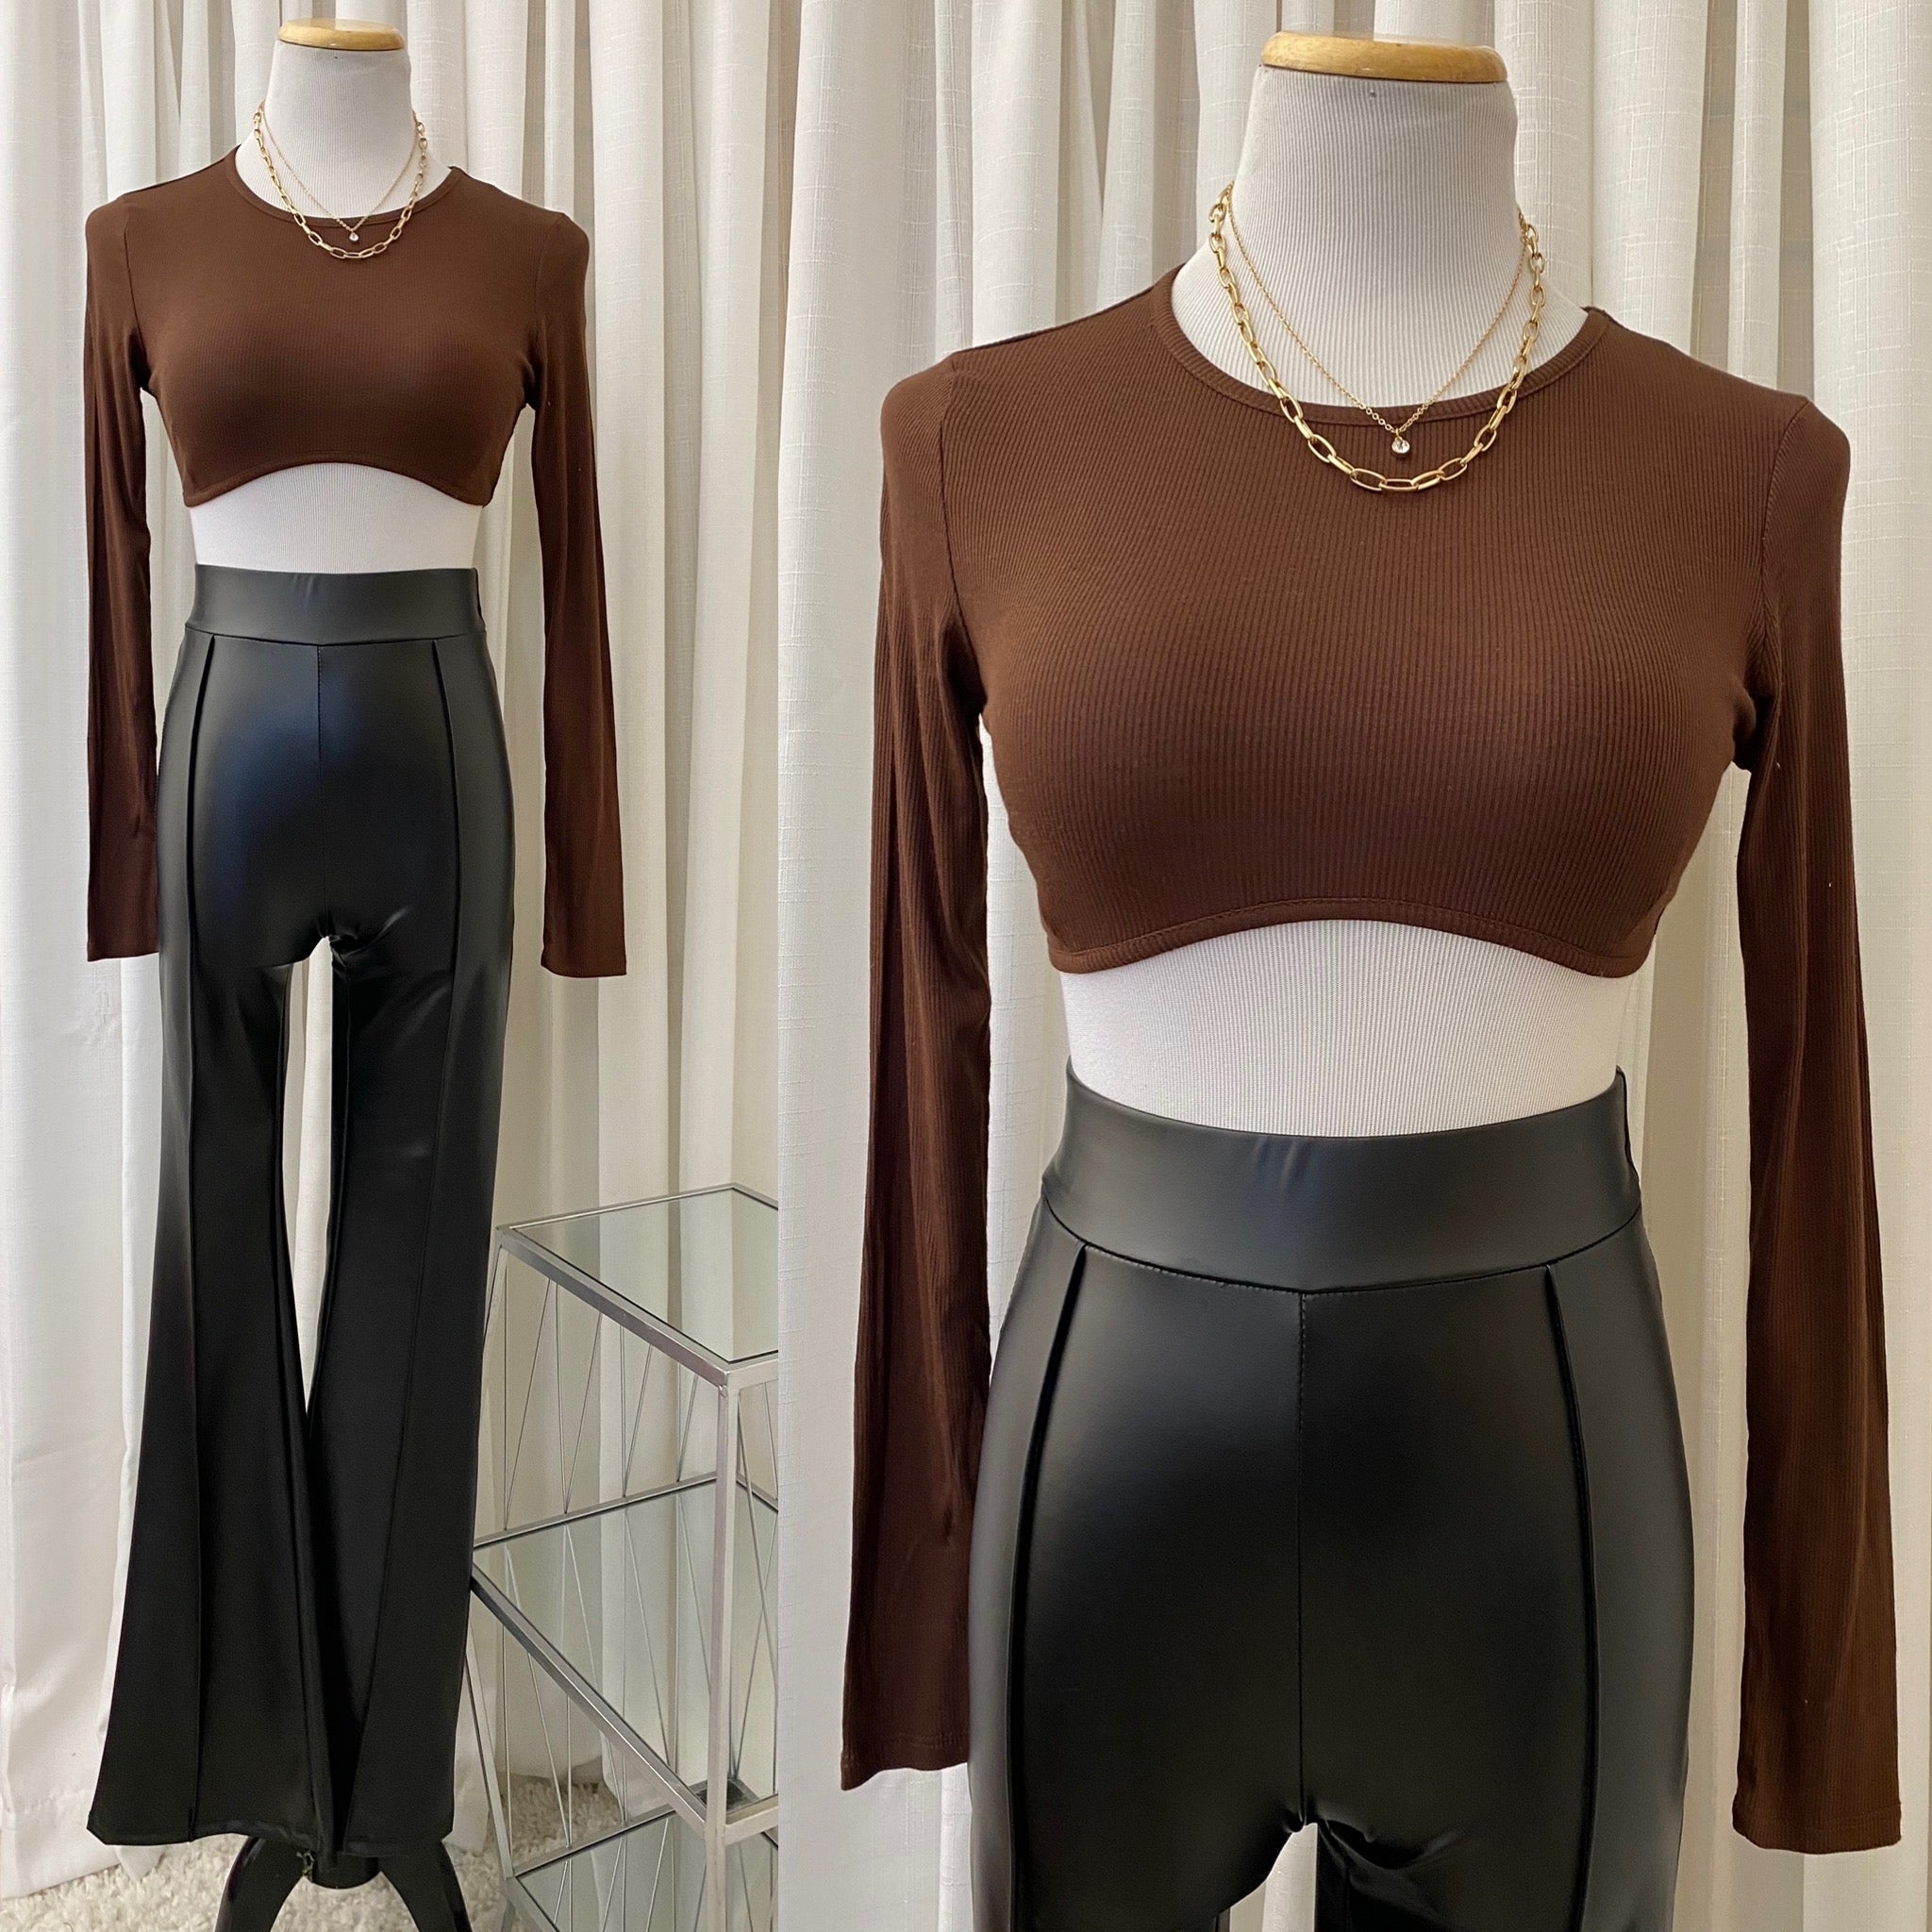 The “Kylie” Ribbed Crop Top